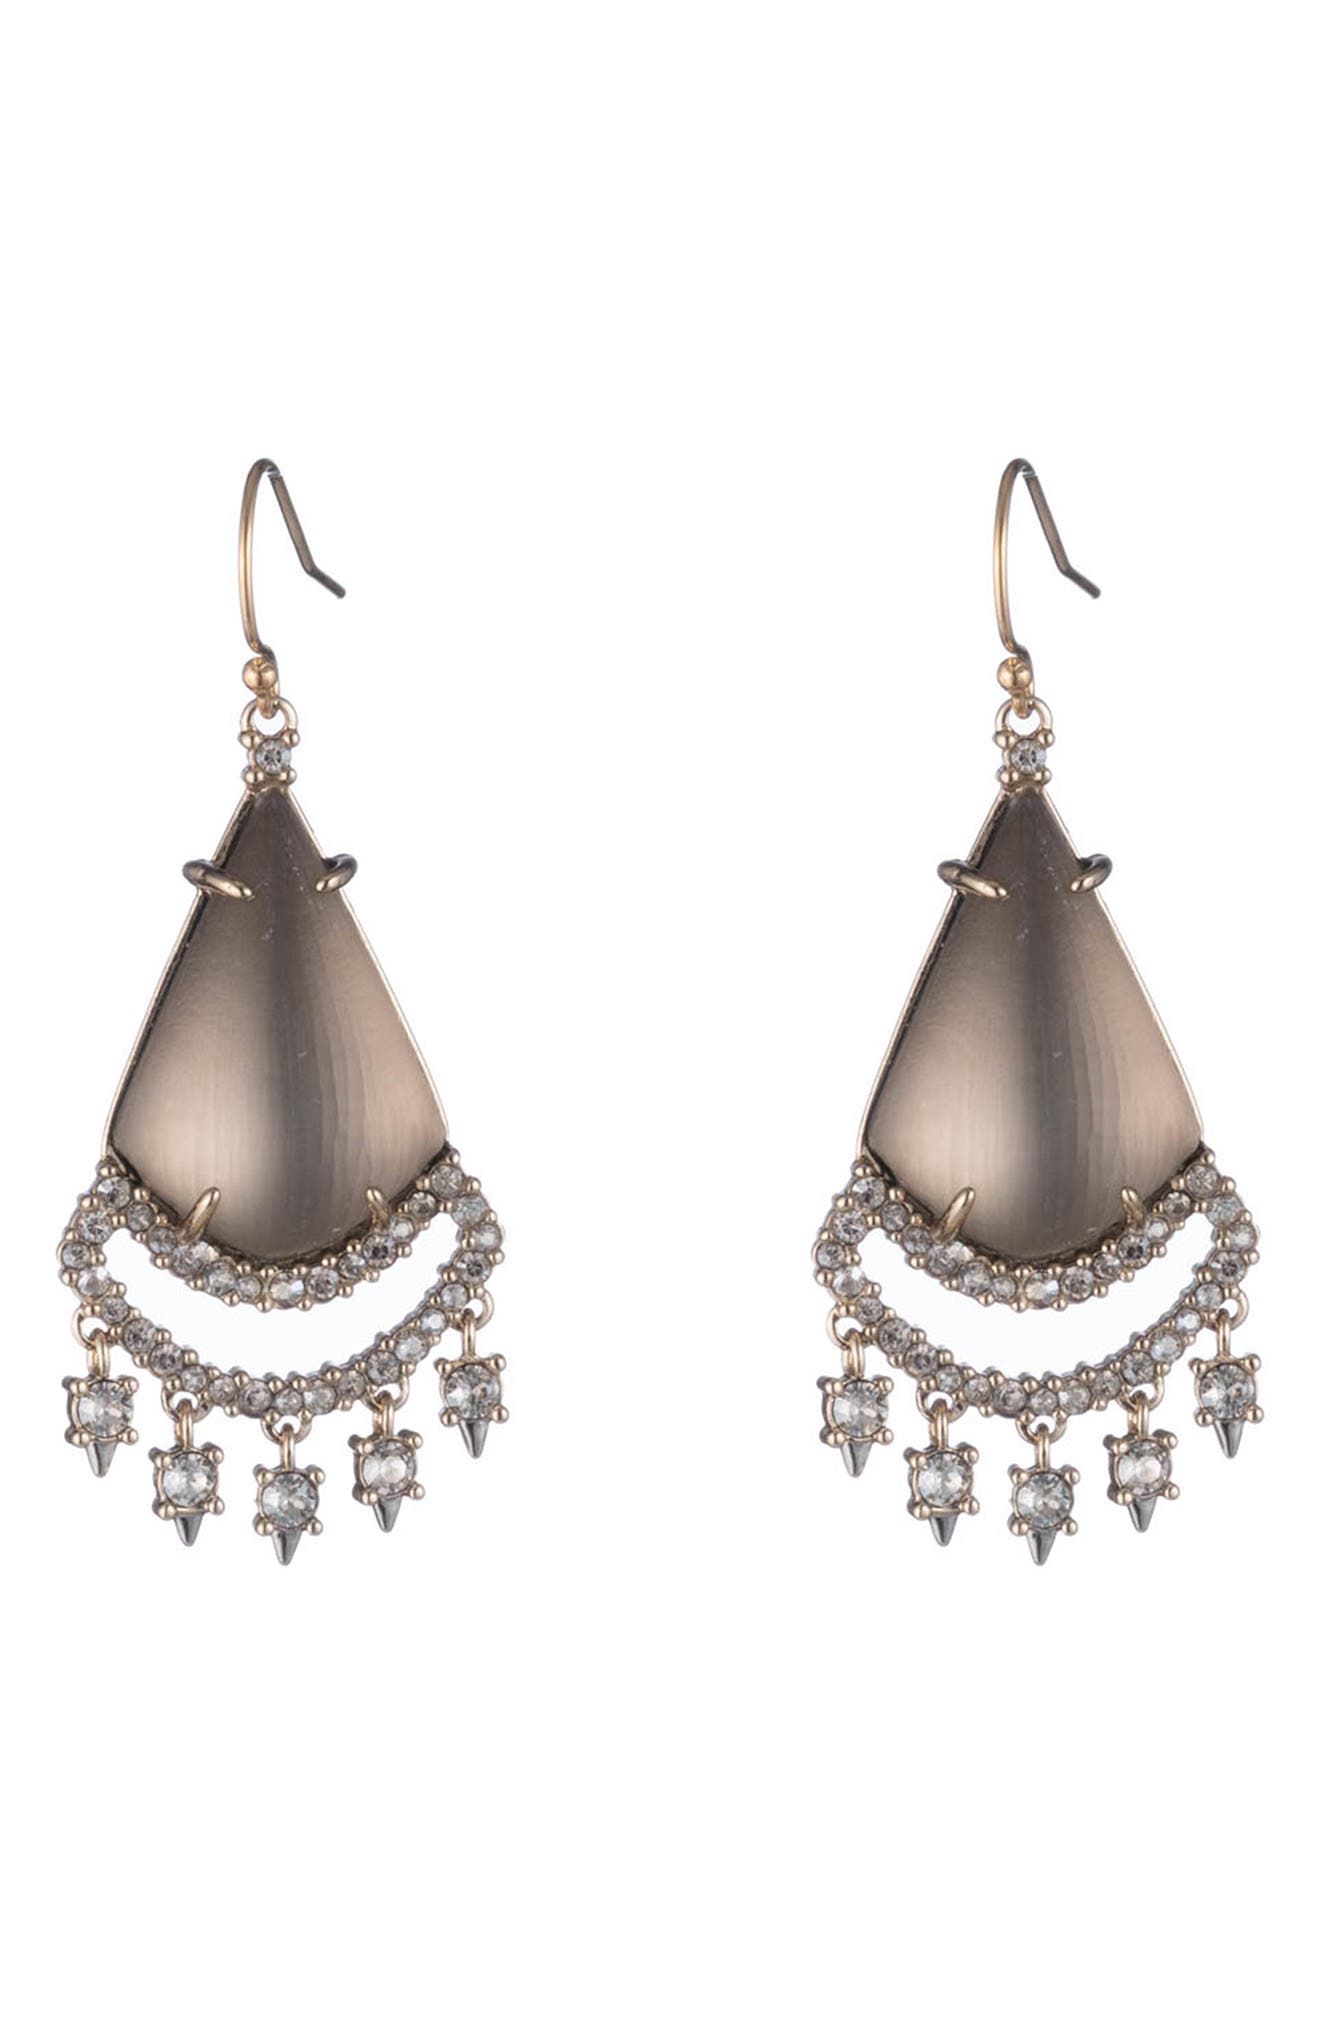 Alexis Bittar 10k Gold Plated Lucite Crystal Drop Earrings In Warm Grey